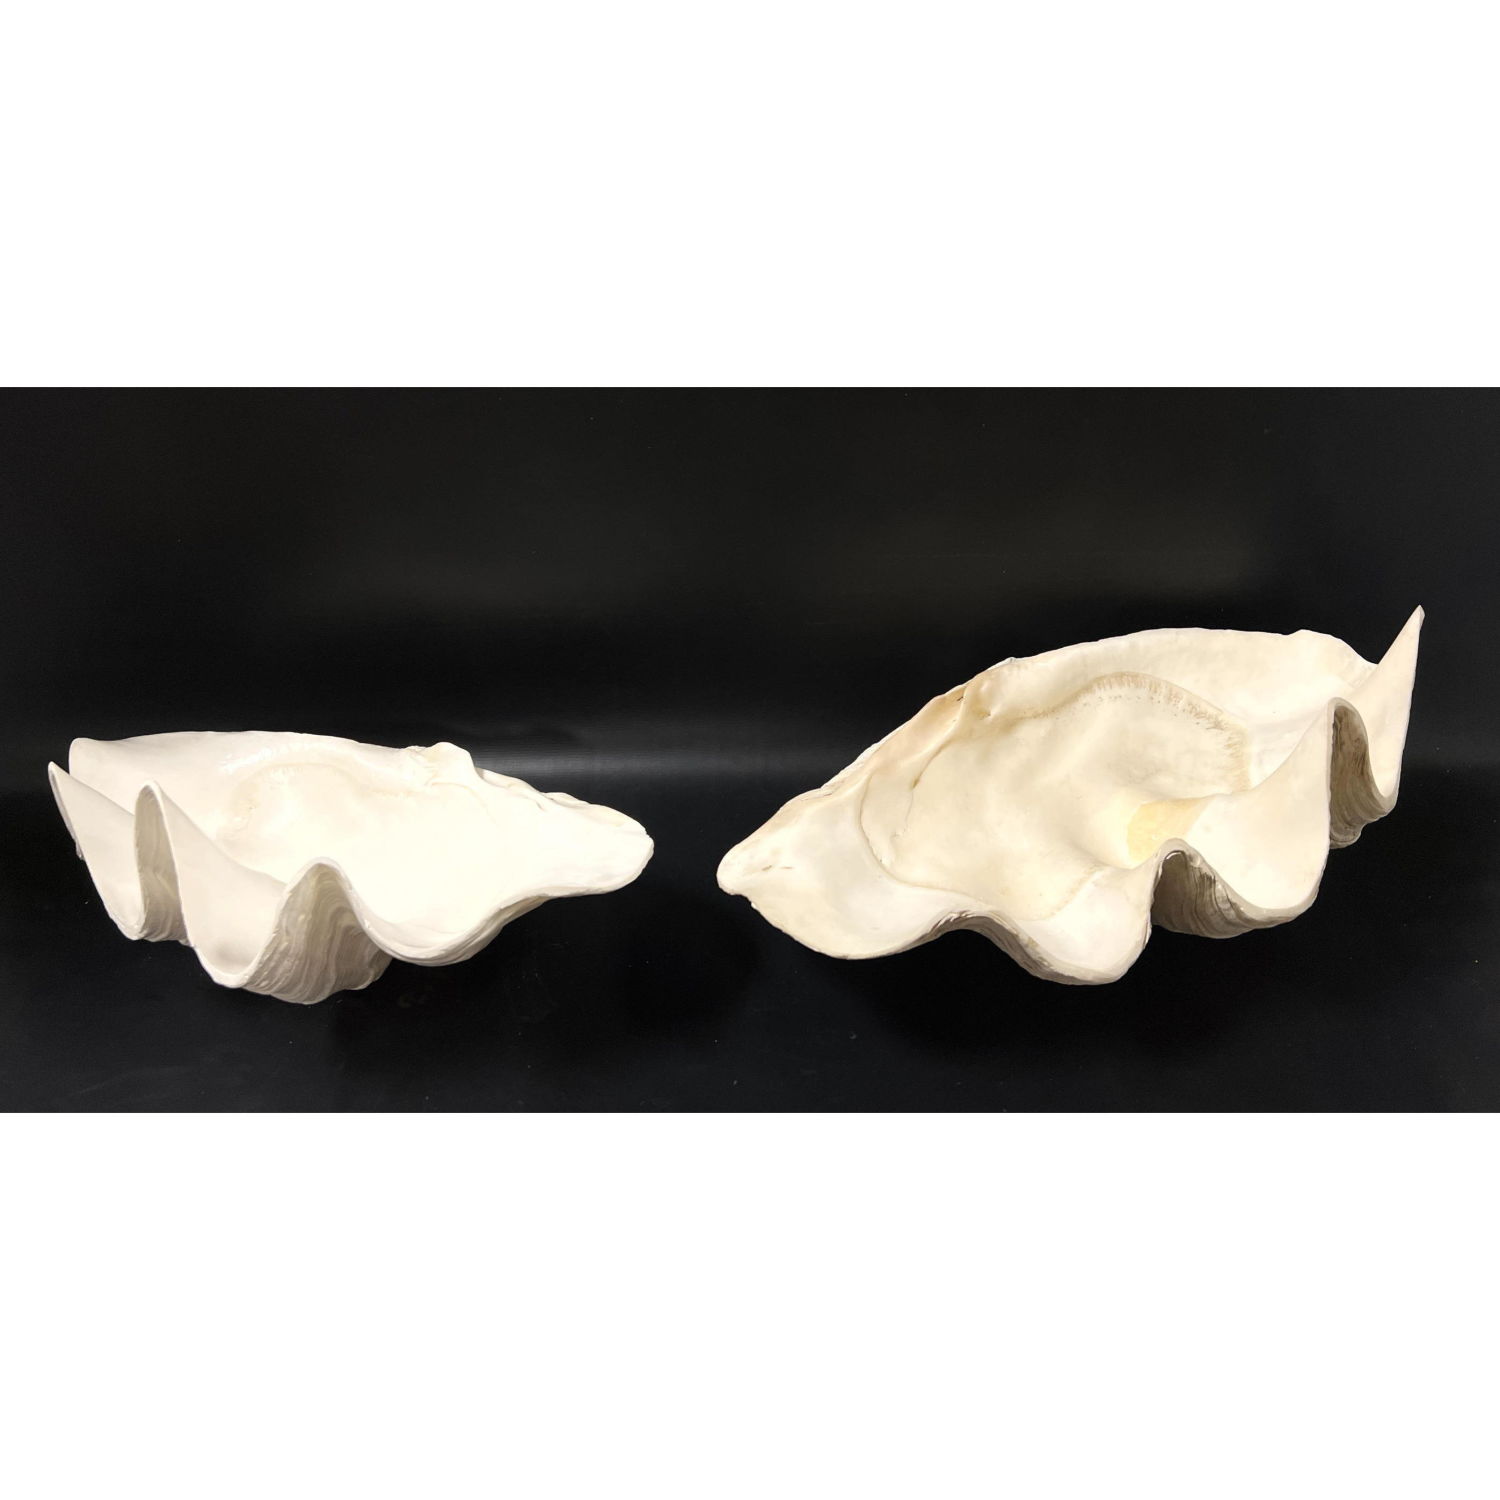 2pc Natural Giant Clam Shells  2ff46a